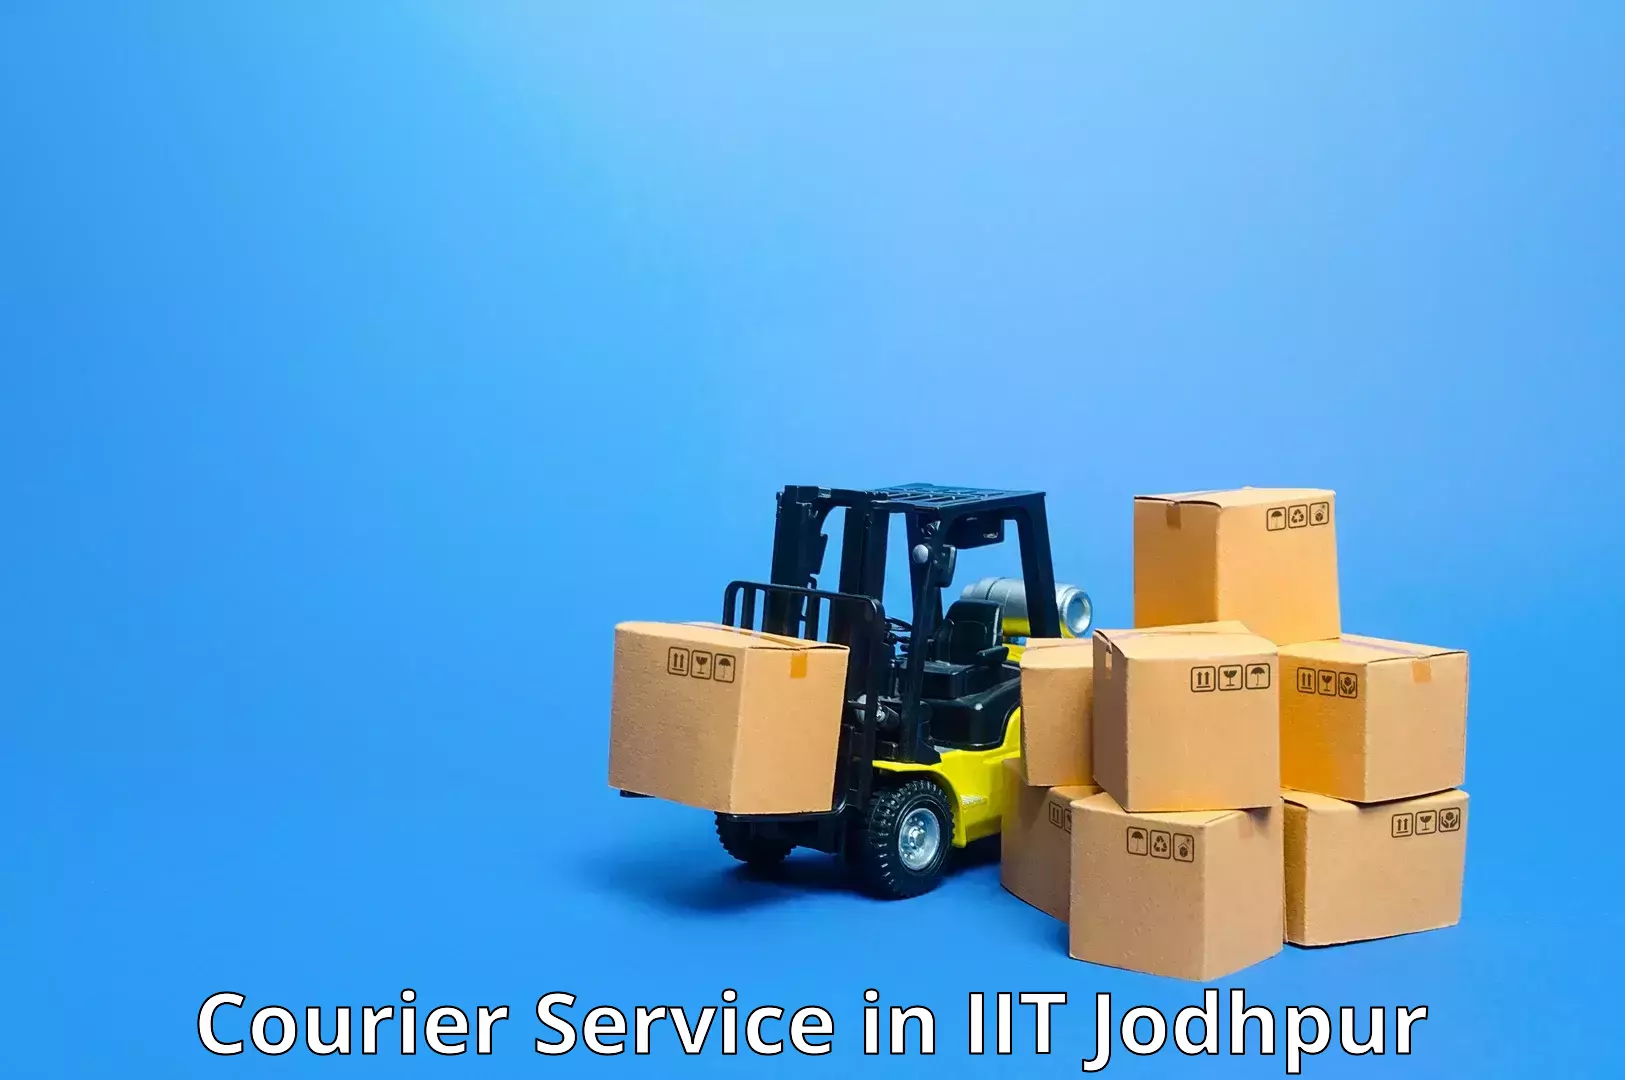 Dynamic courier services in IIT Jodhpur